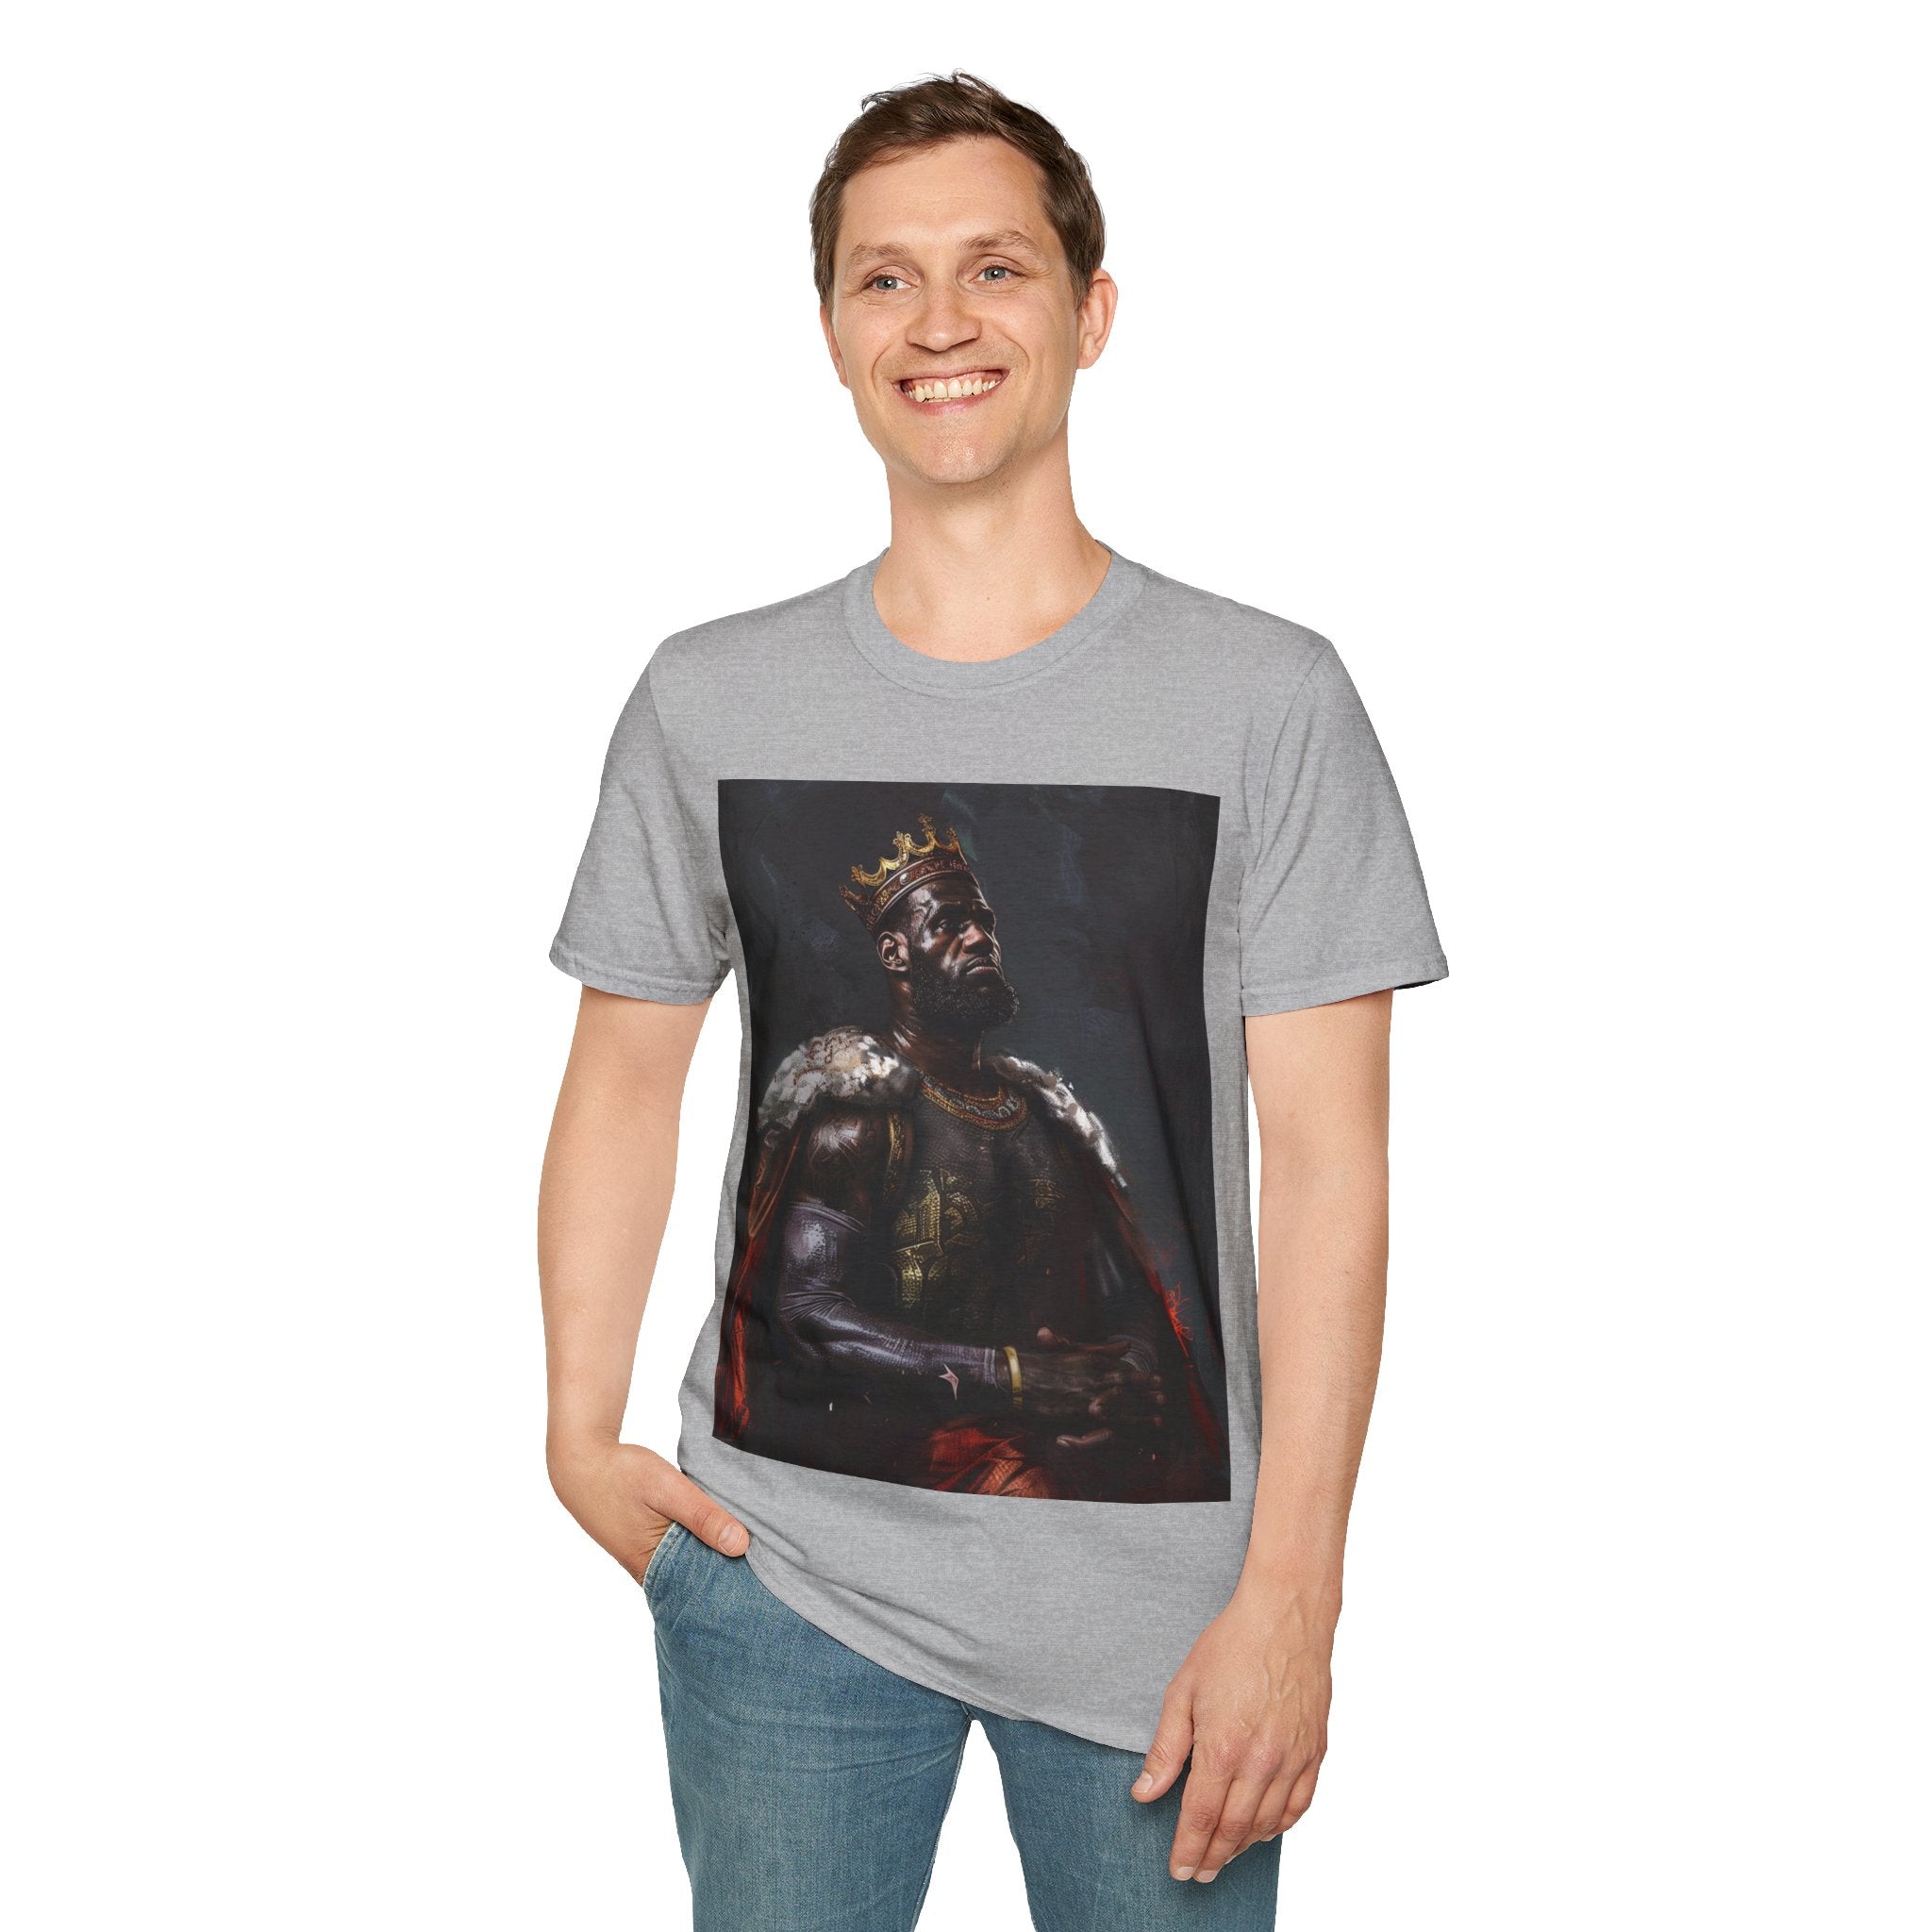 The image showcases the sophisticated unisex softstyle t-shirt, featuring a detailed and artistically rendered portrait of King James in the style of a Renaissance painting. The quality of the softstyle material is evident, promising comfort and durability, while the design speaks to the blend of sports legacy and classical elegance.